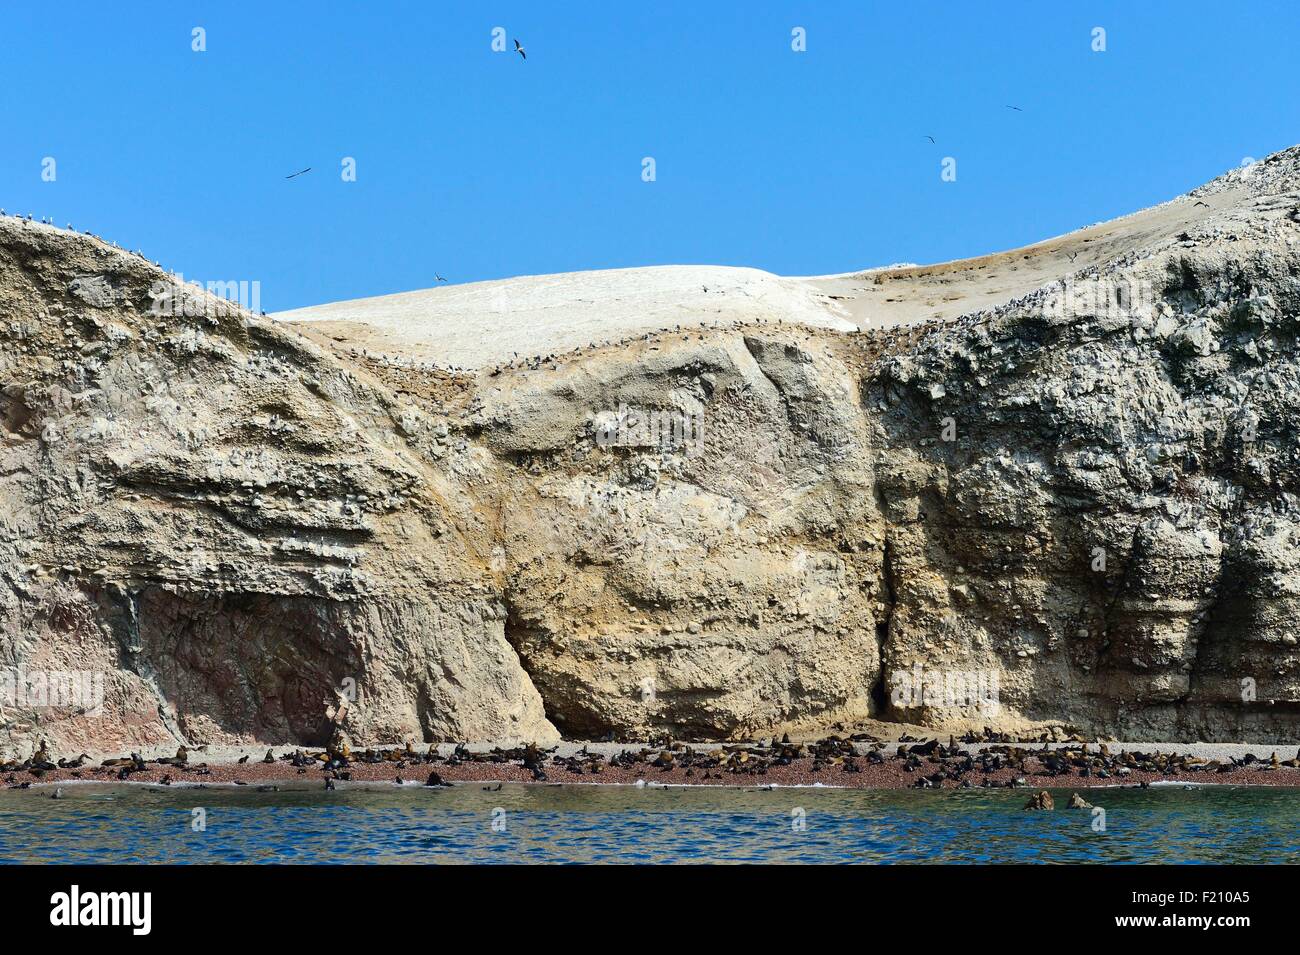 Peru, Pisco Province, Ballestas islands, boat trip across the Paracas National Reserve, bird sanctuary where live many seabird colonies which produce guano used as fertilizer Stock Photo